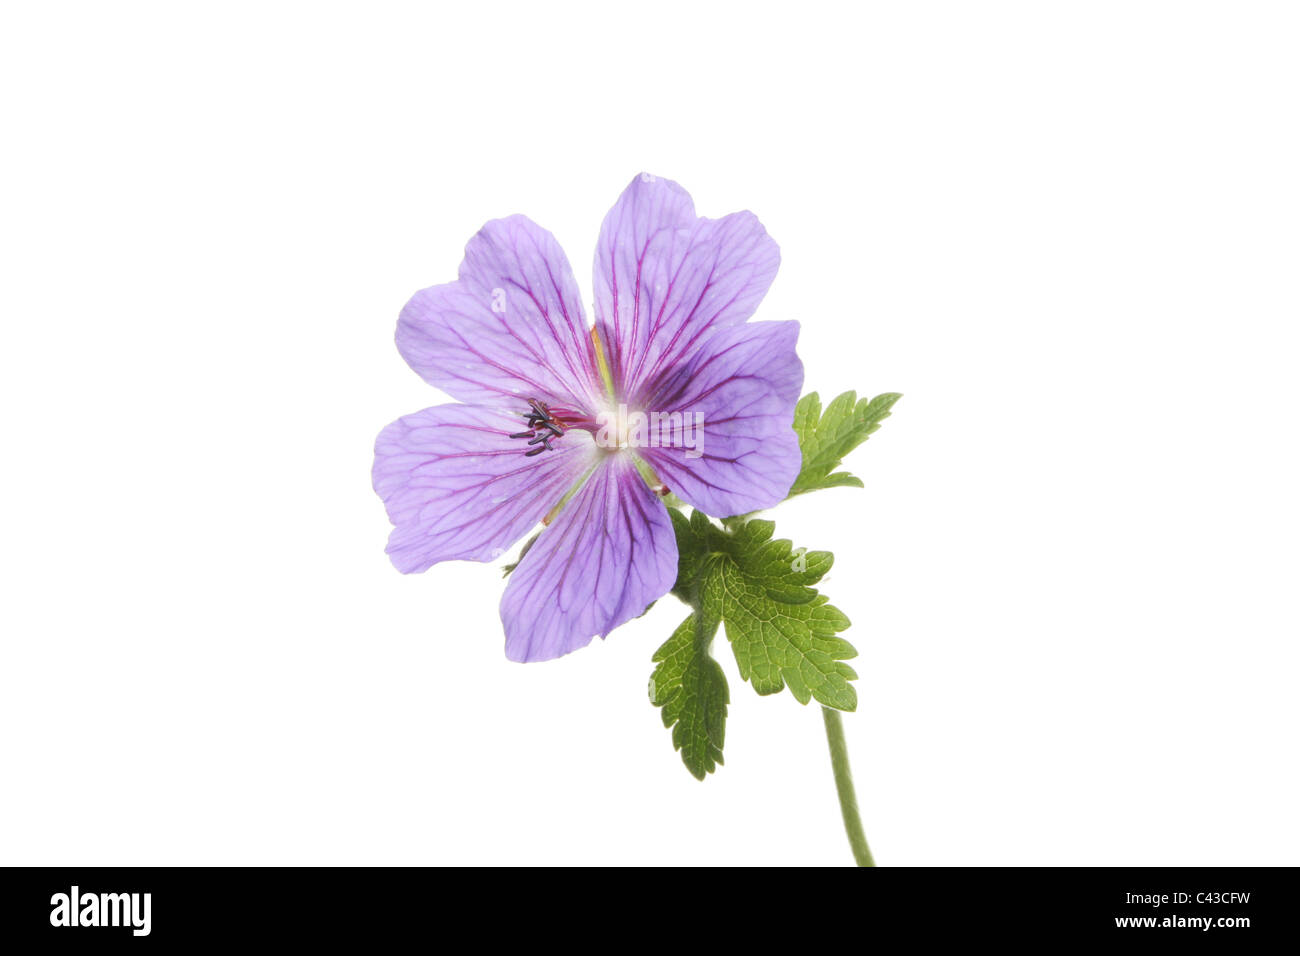 Blue geranium flower and leaves isolated against white Stock Photo